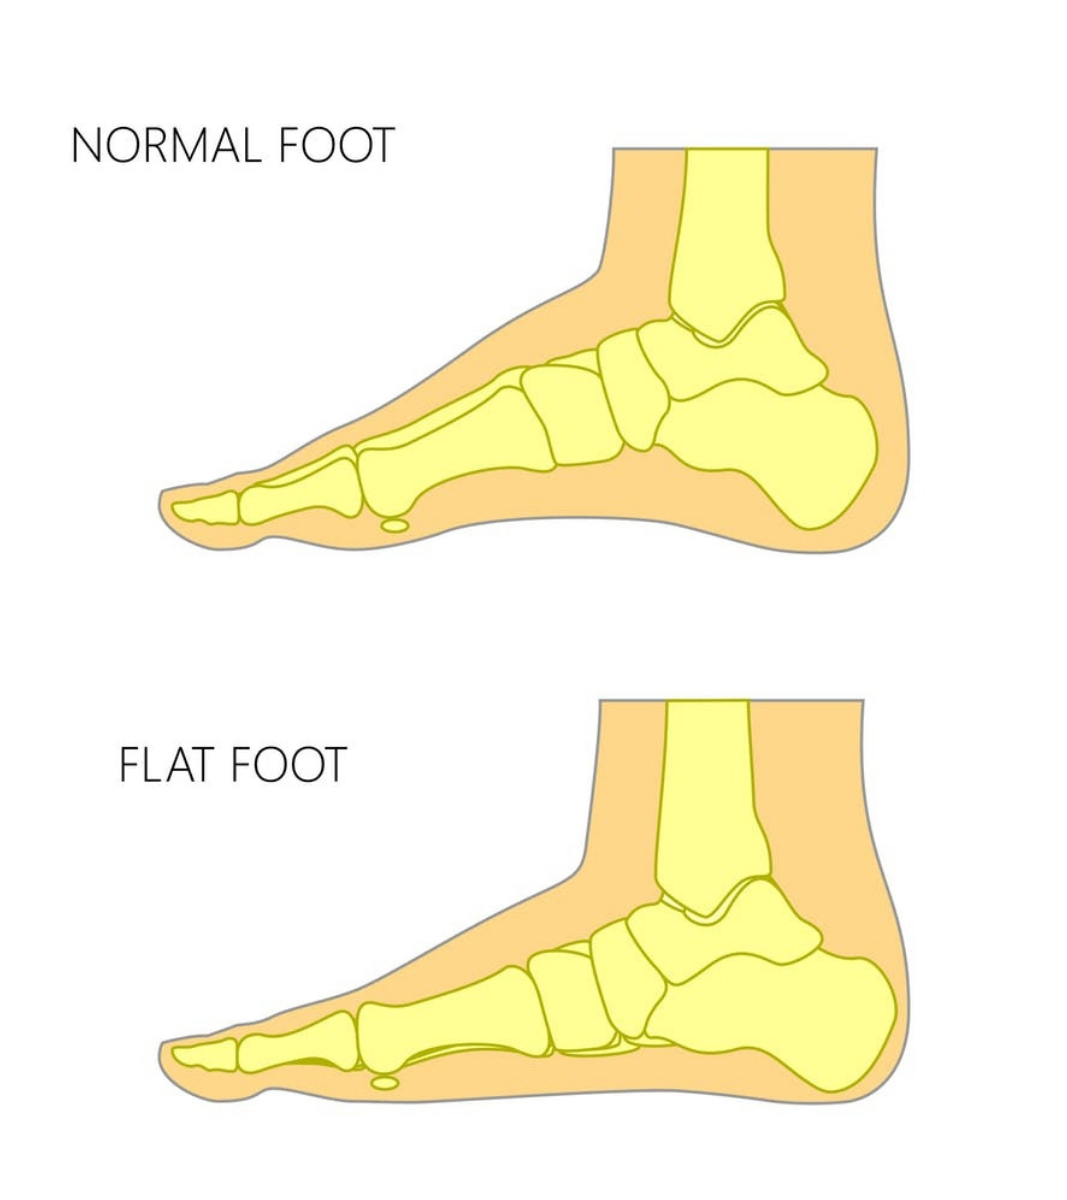 Adult acquired flatfoot,